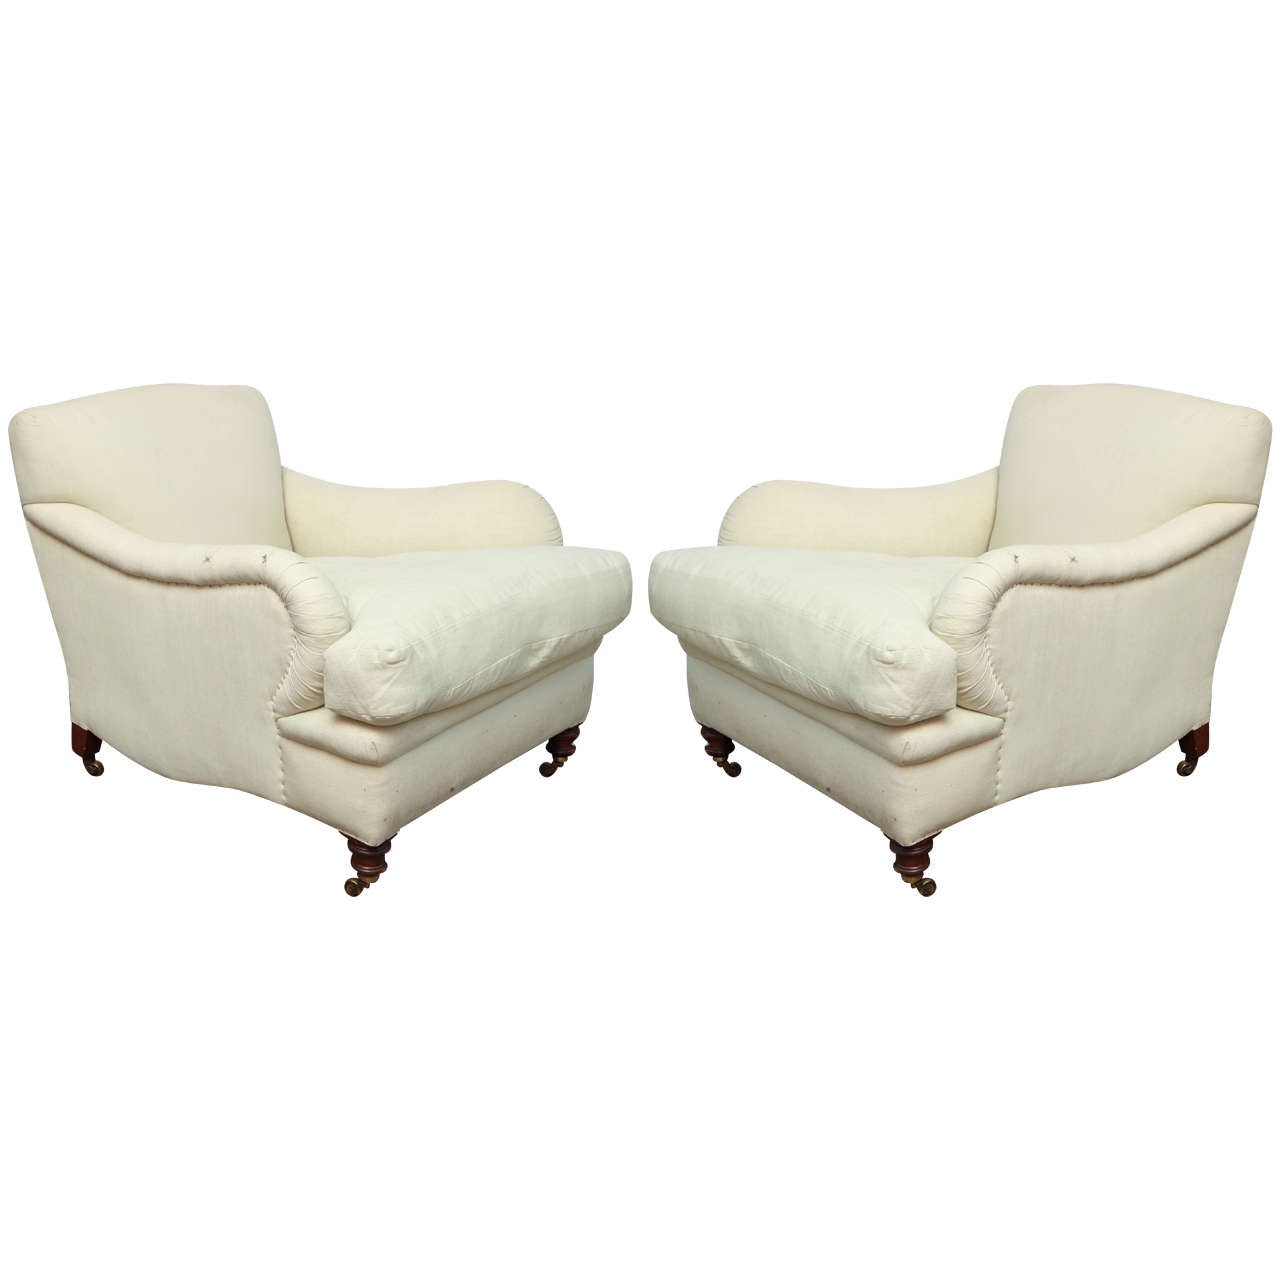 Pair of Howard Style Armchairs